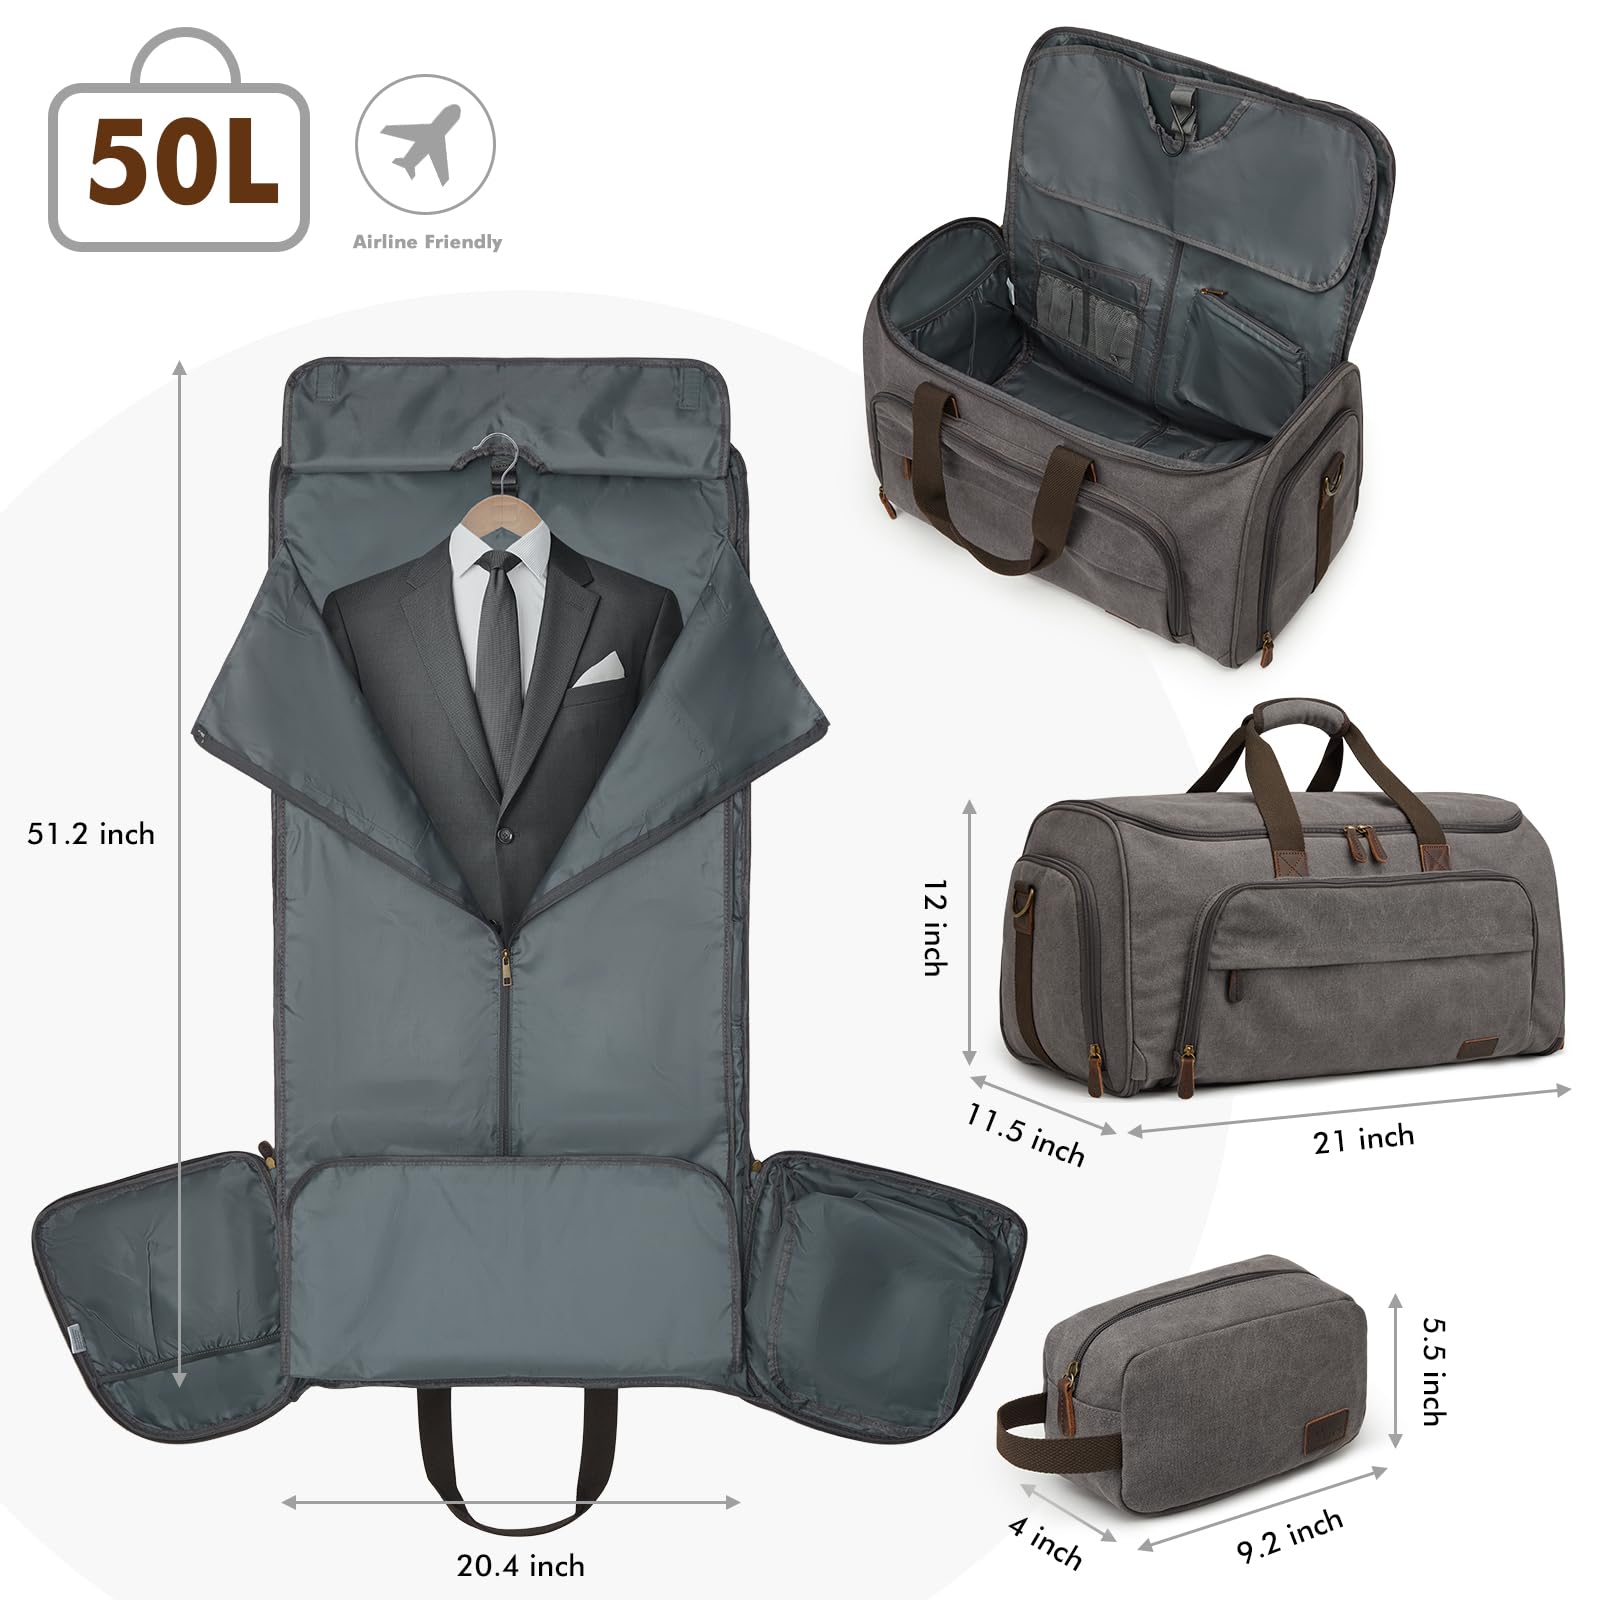 All-In-One Garment Travel Bag